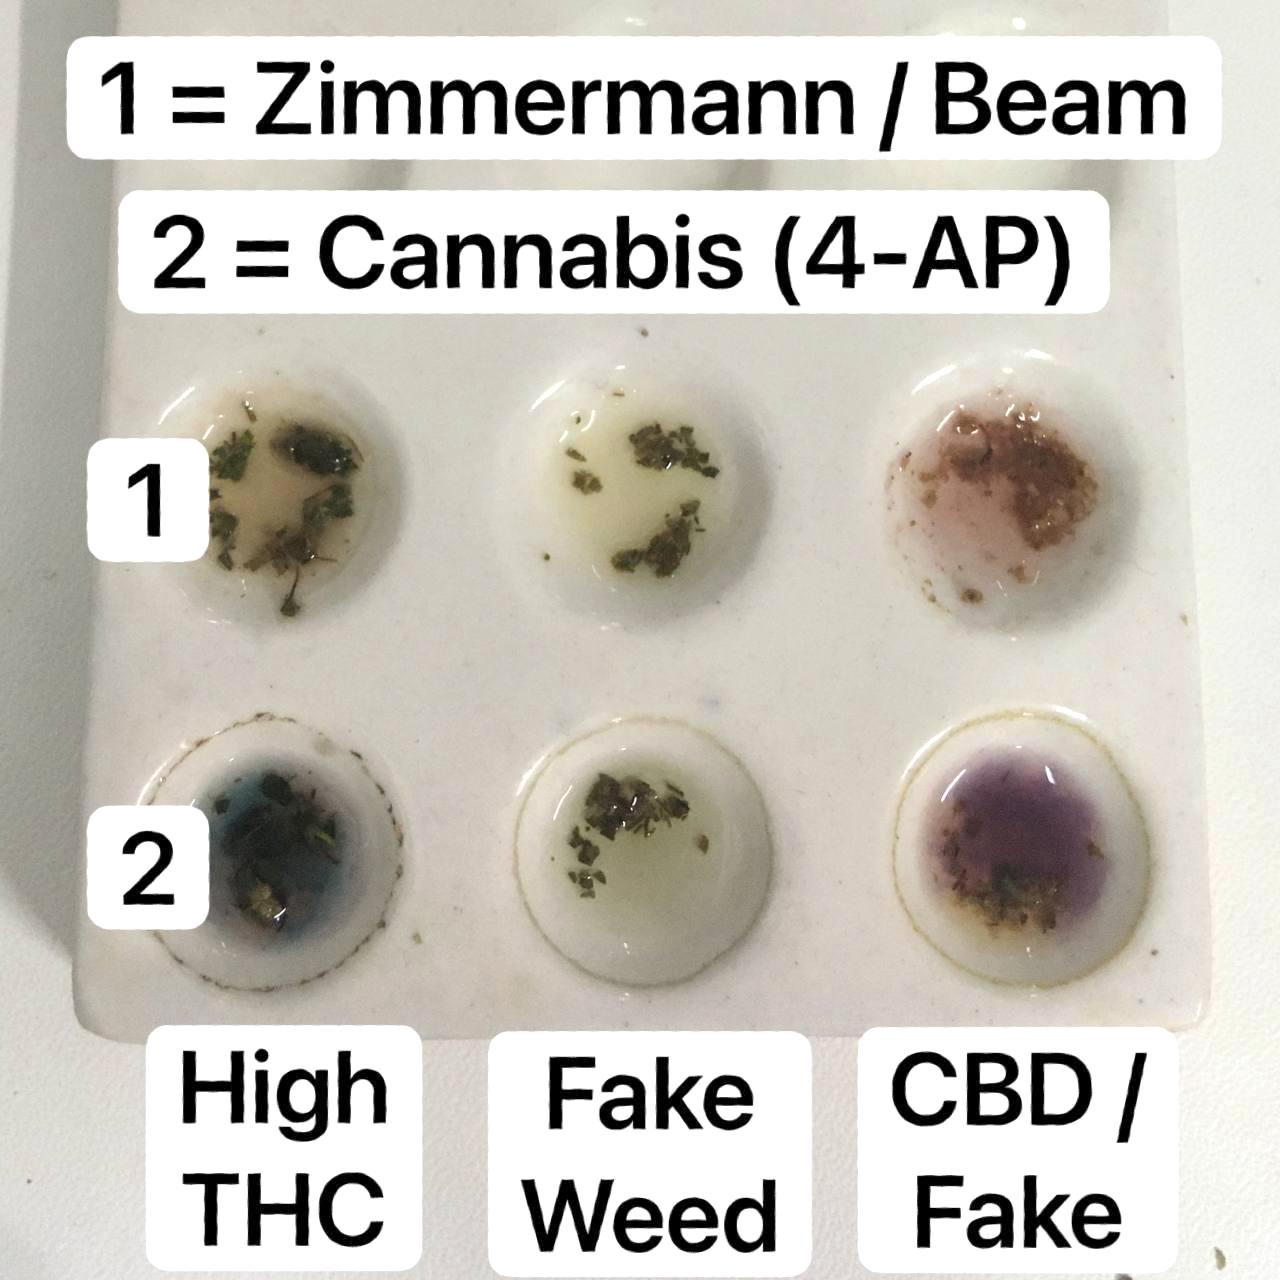 Cannabis and "fake weed" reagent testing results.